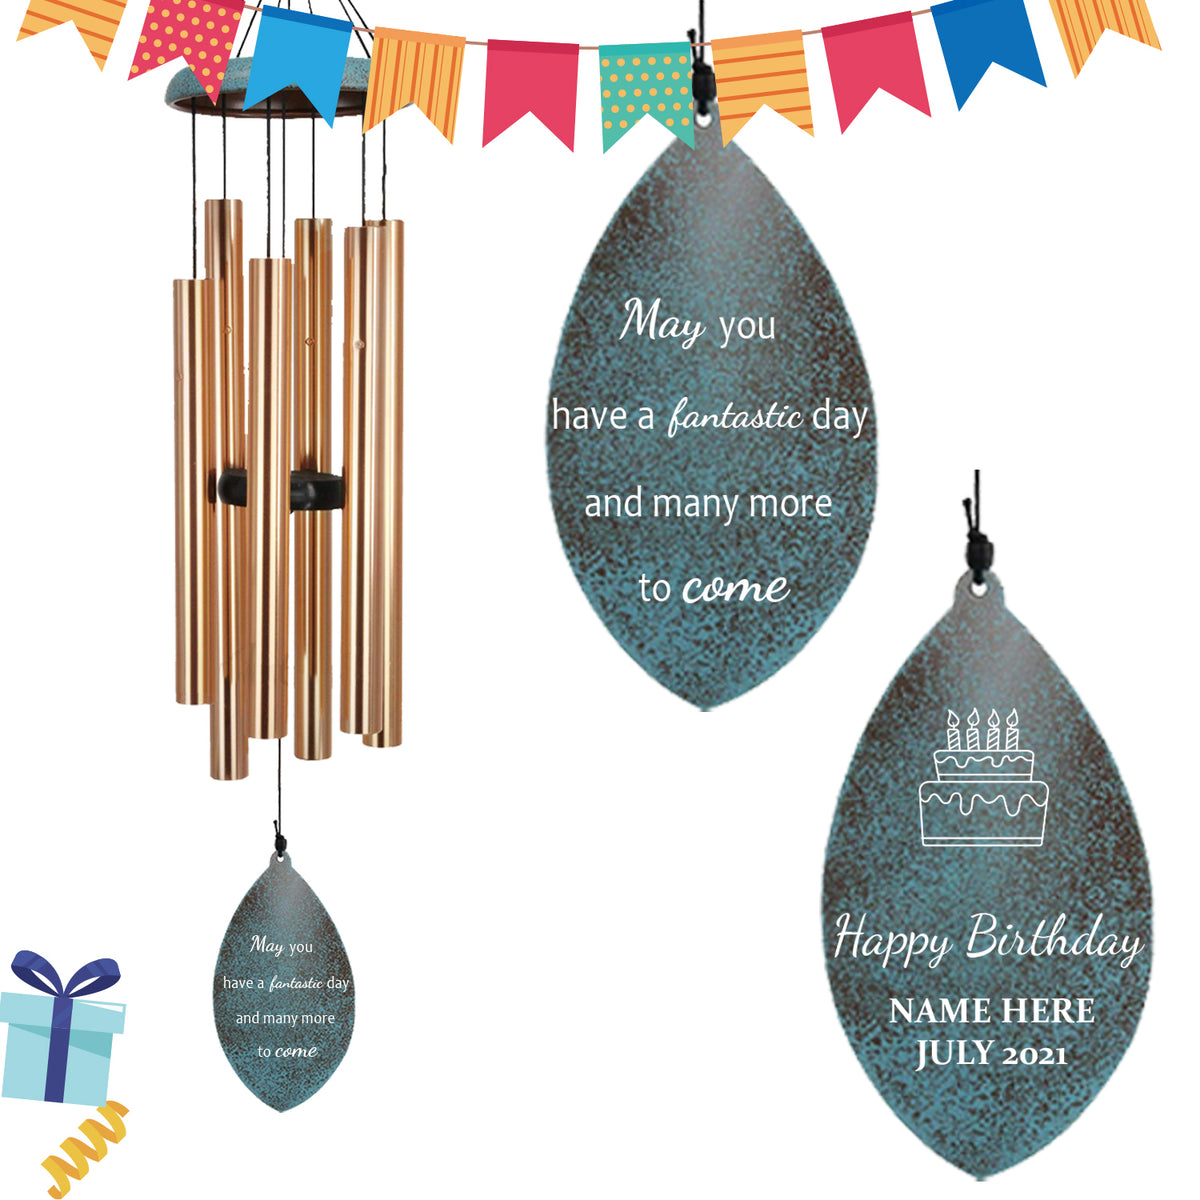 Personalized Birthday Gift Wind Chimes-35 inch, 6 Tubes, Golden/Black-Leaf Style